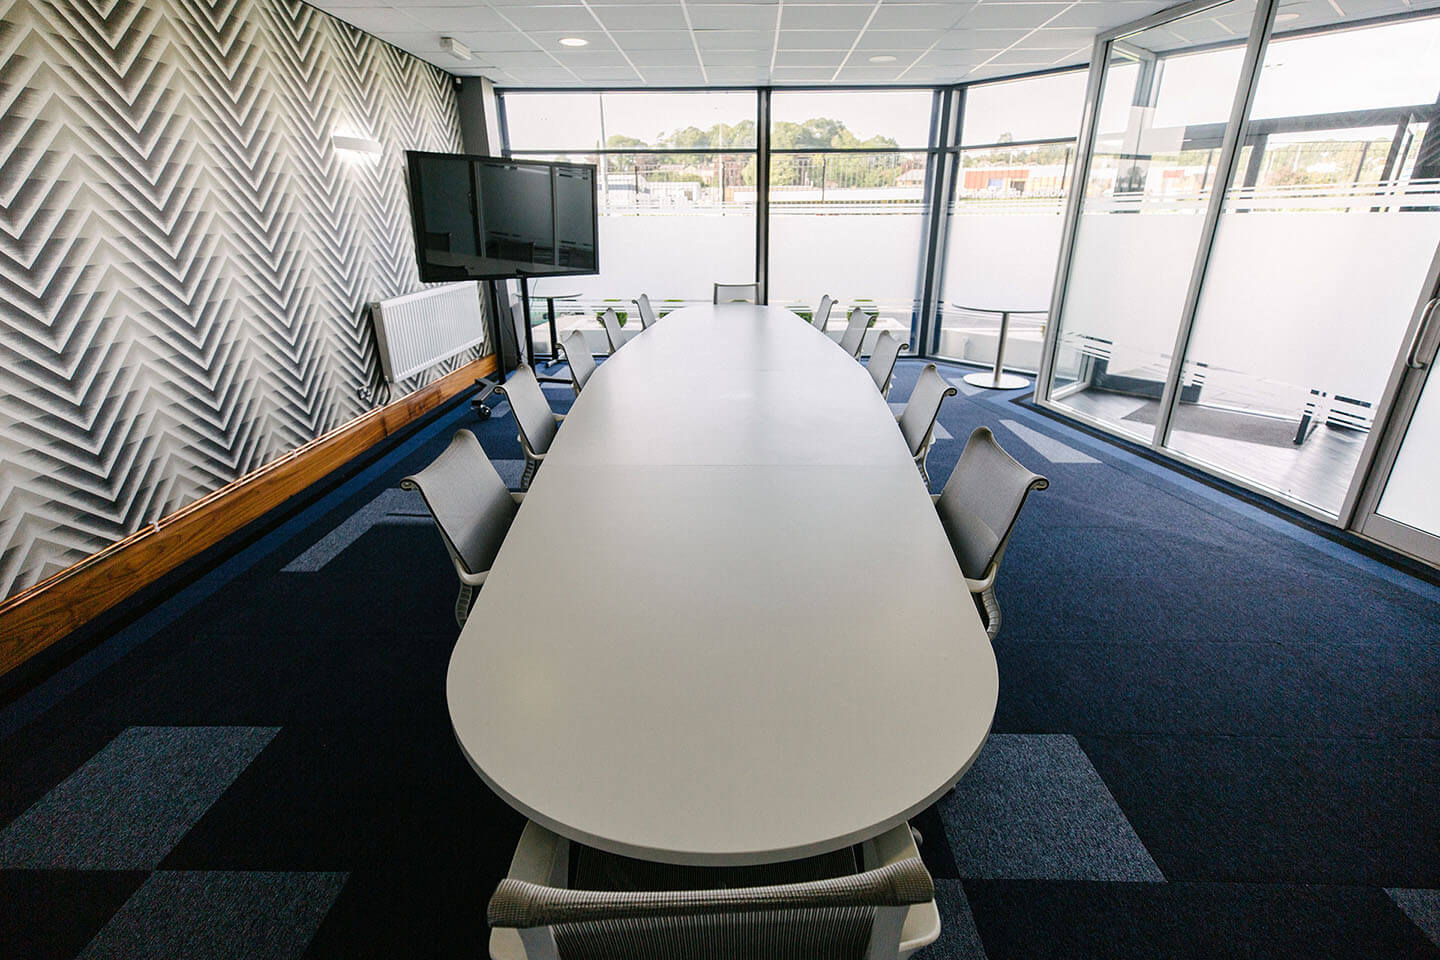 A typical boardroom, a large white table centres the room, blue tiled carpet fills the large room with plenty of natural light.